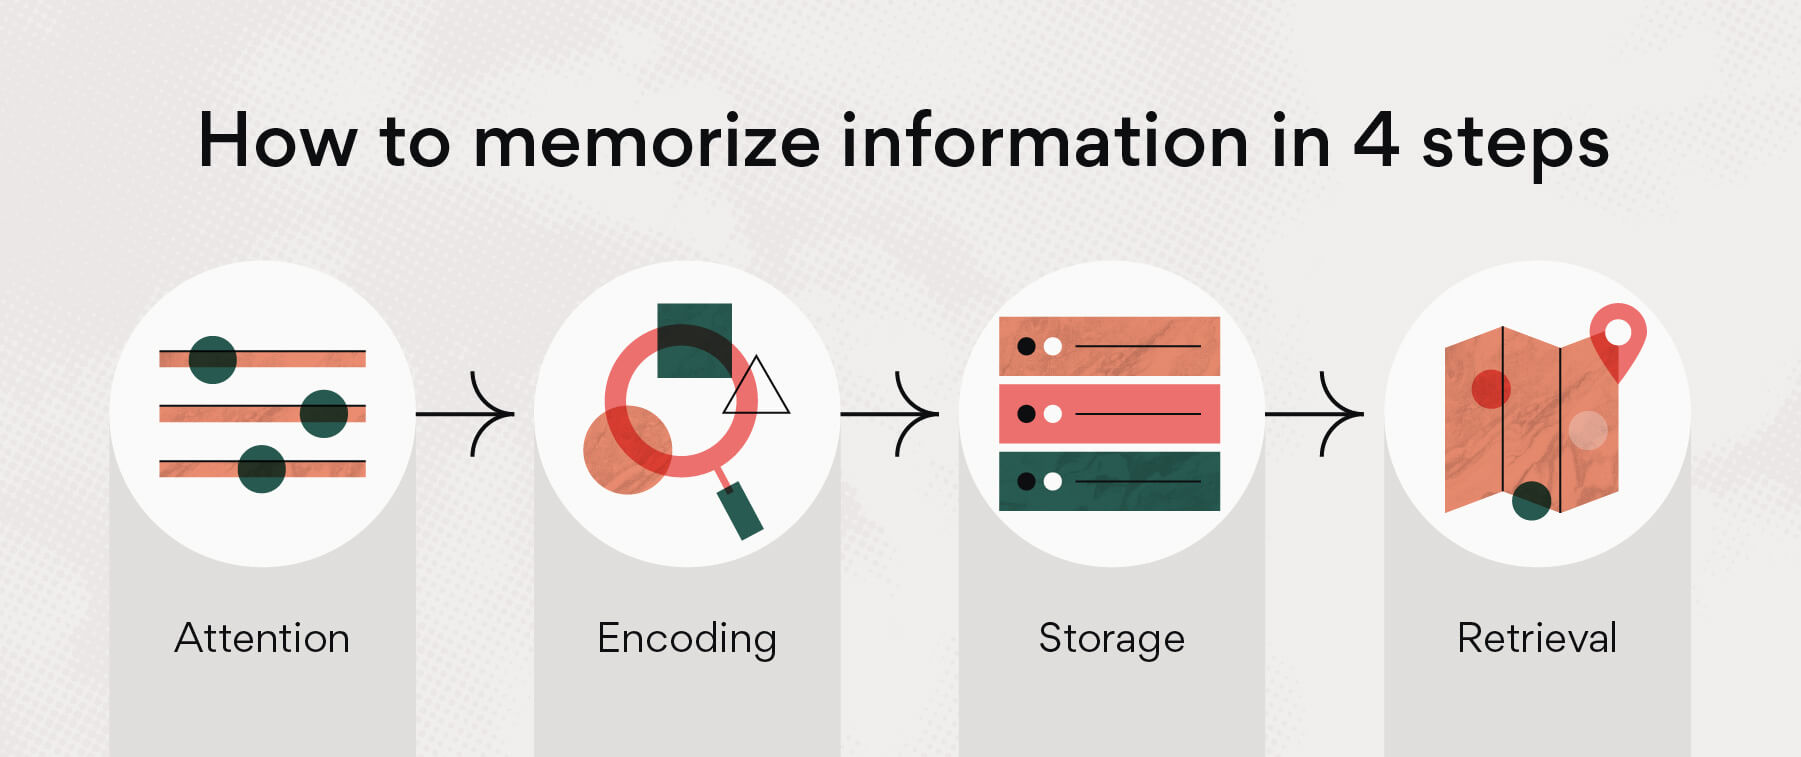 How to memorize information in 4 steps